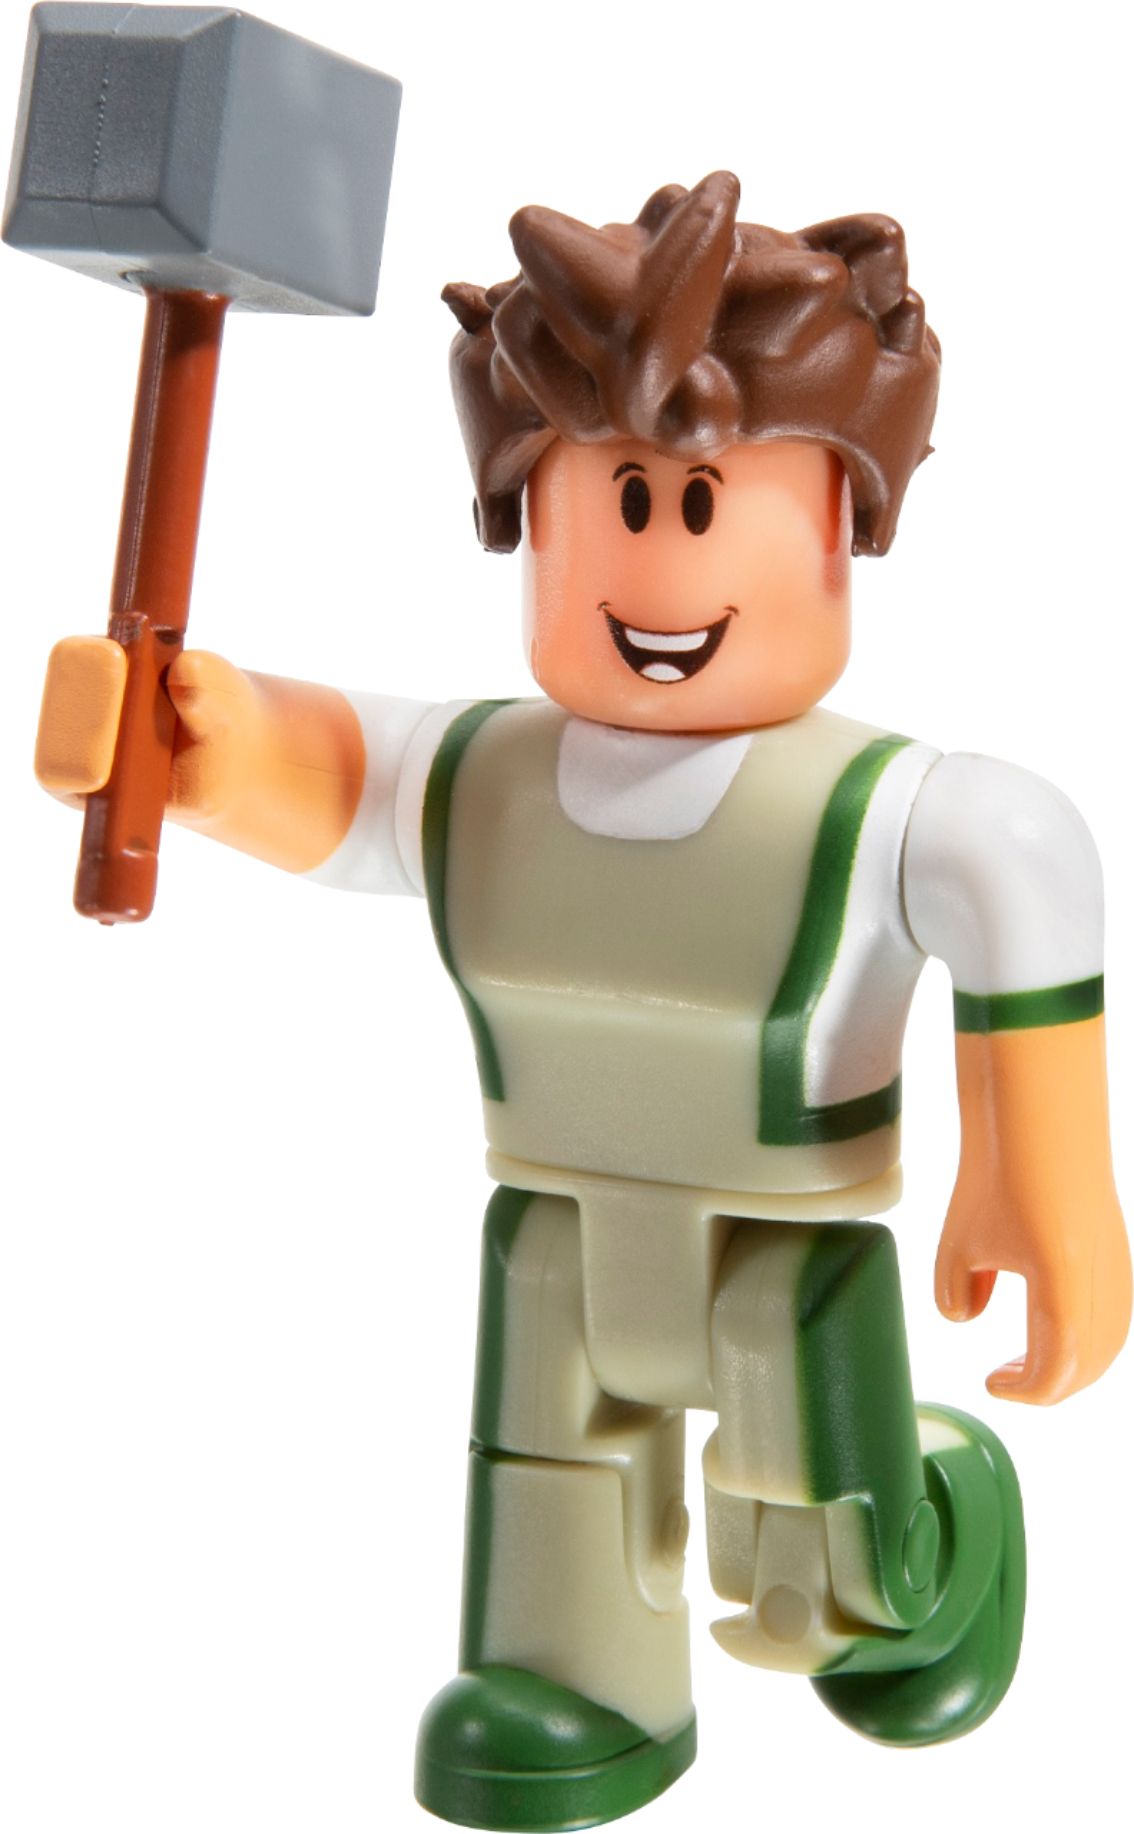 Roblox Series 5 Moderator - loose action figure w/ hammer and